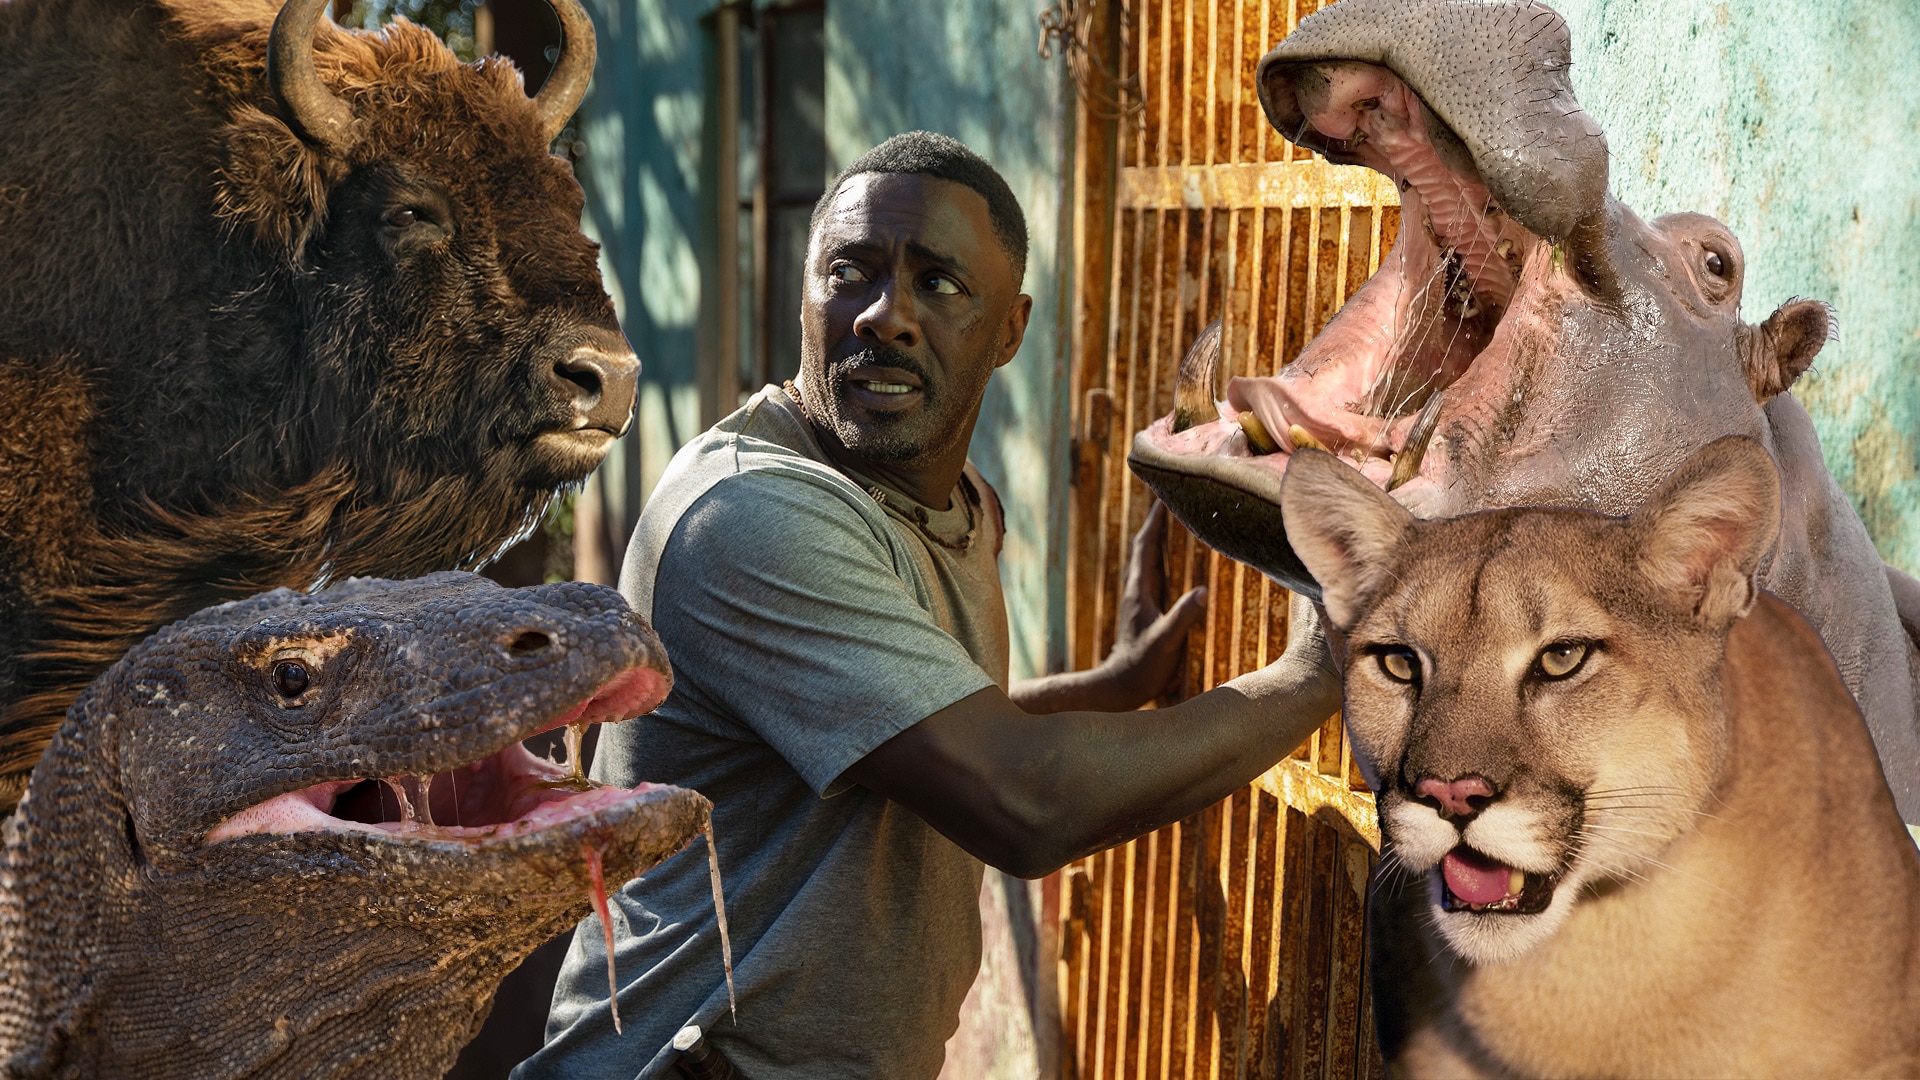 Idris Elba as Dr. Nate Samuels in Beast (2022) surrounded by a Bison, Komodo Dragon, Hippopotamus, and Mountain Lion.